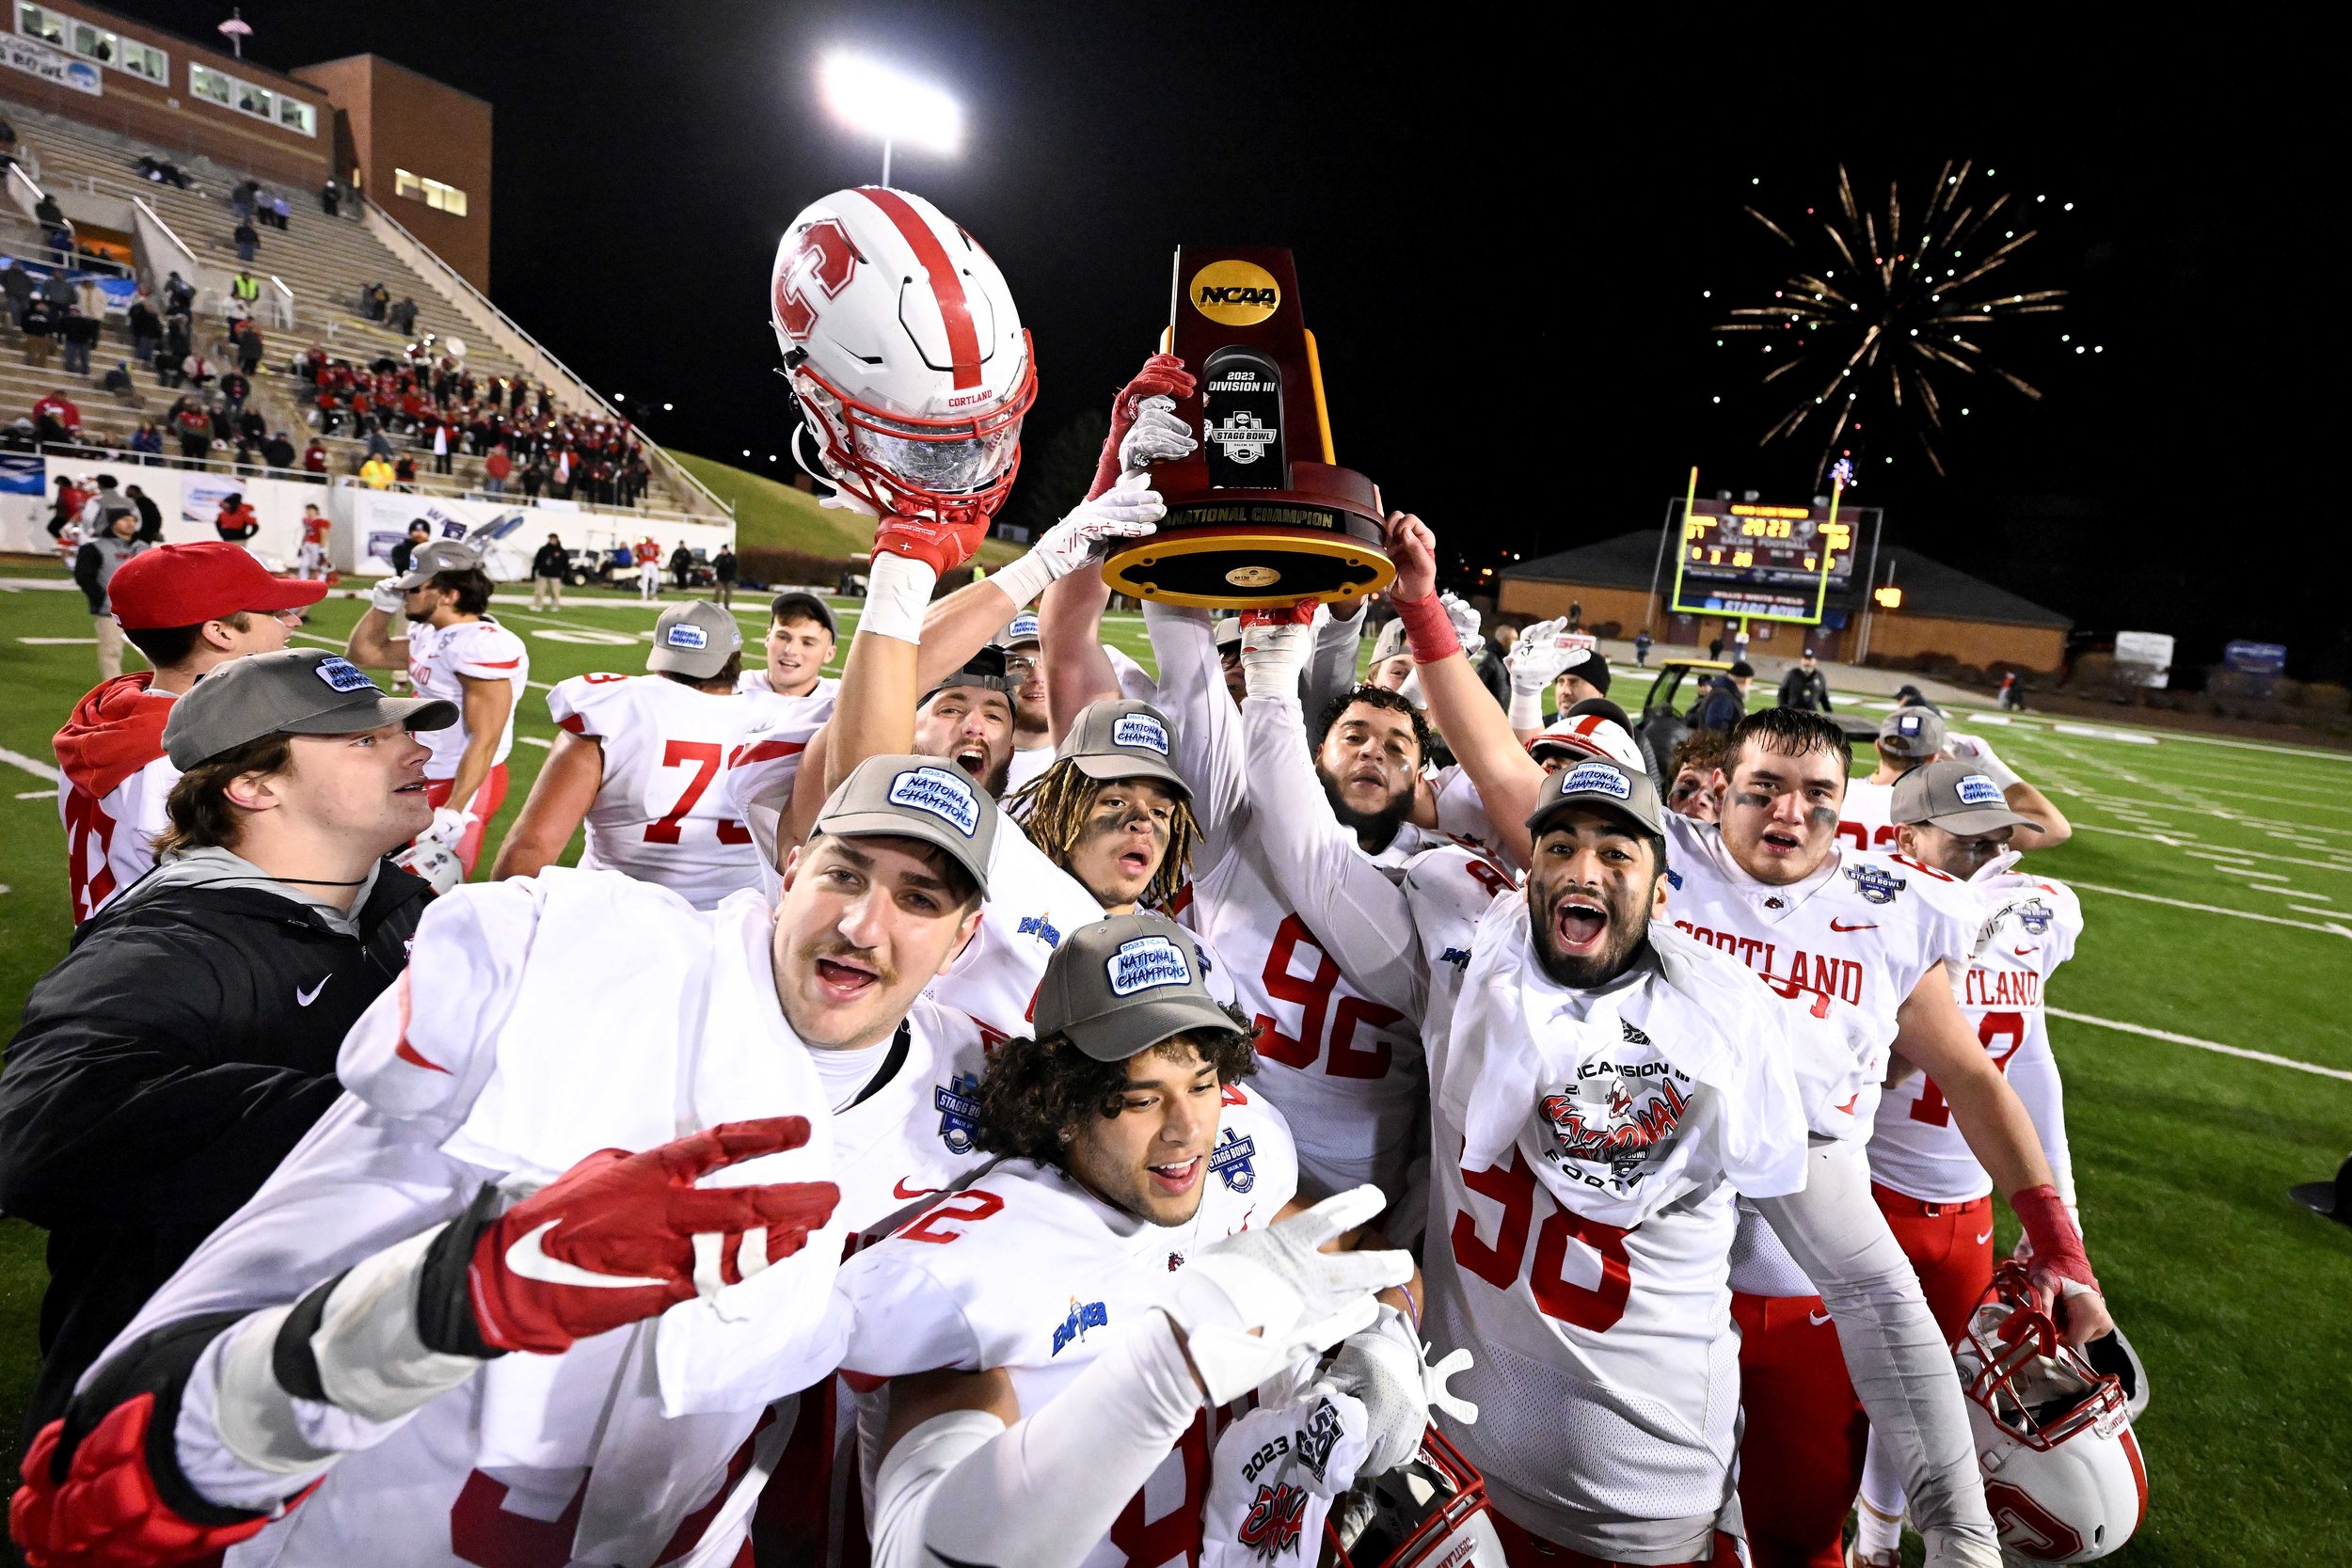  SALEM, VIRGINIA - DECEMBER 15:  The Cortland Red Dragons celebrate after a win against the North Central Cardinals during the Division III Football Championship held at Salem Stadium on December 15, 2023 in Salem, Virginia. Cortland won 38-37. (Phot